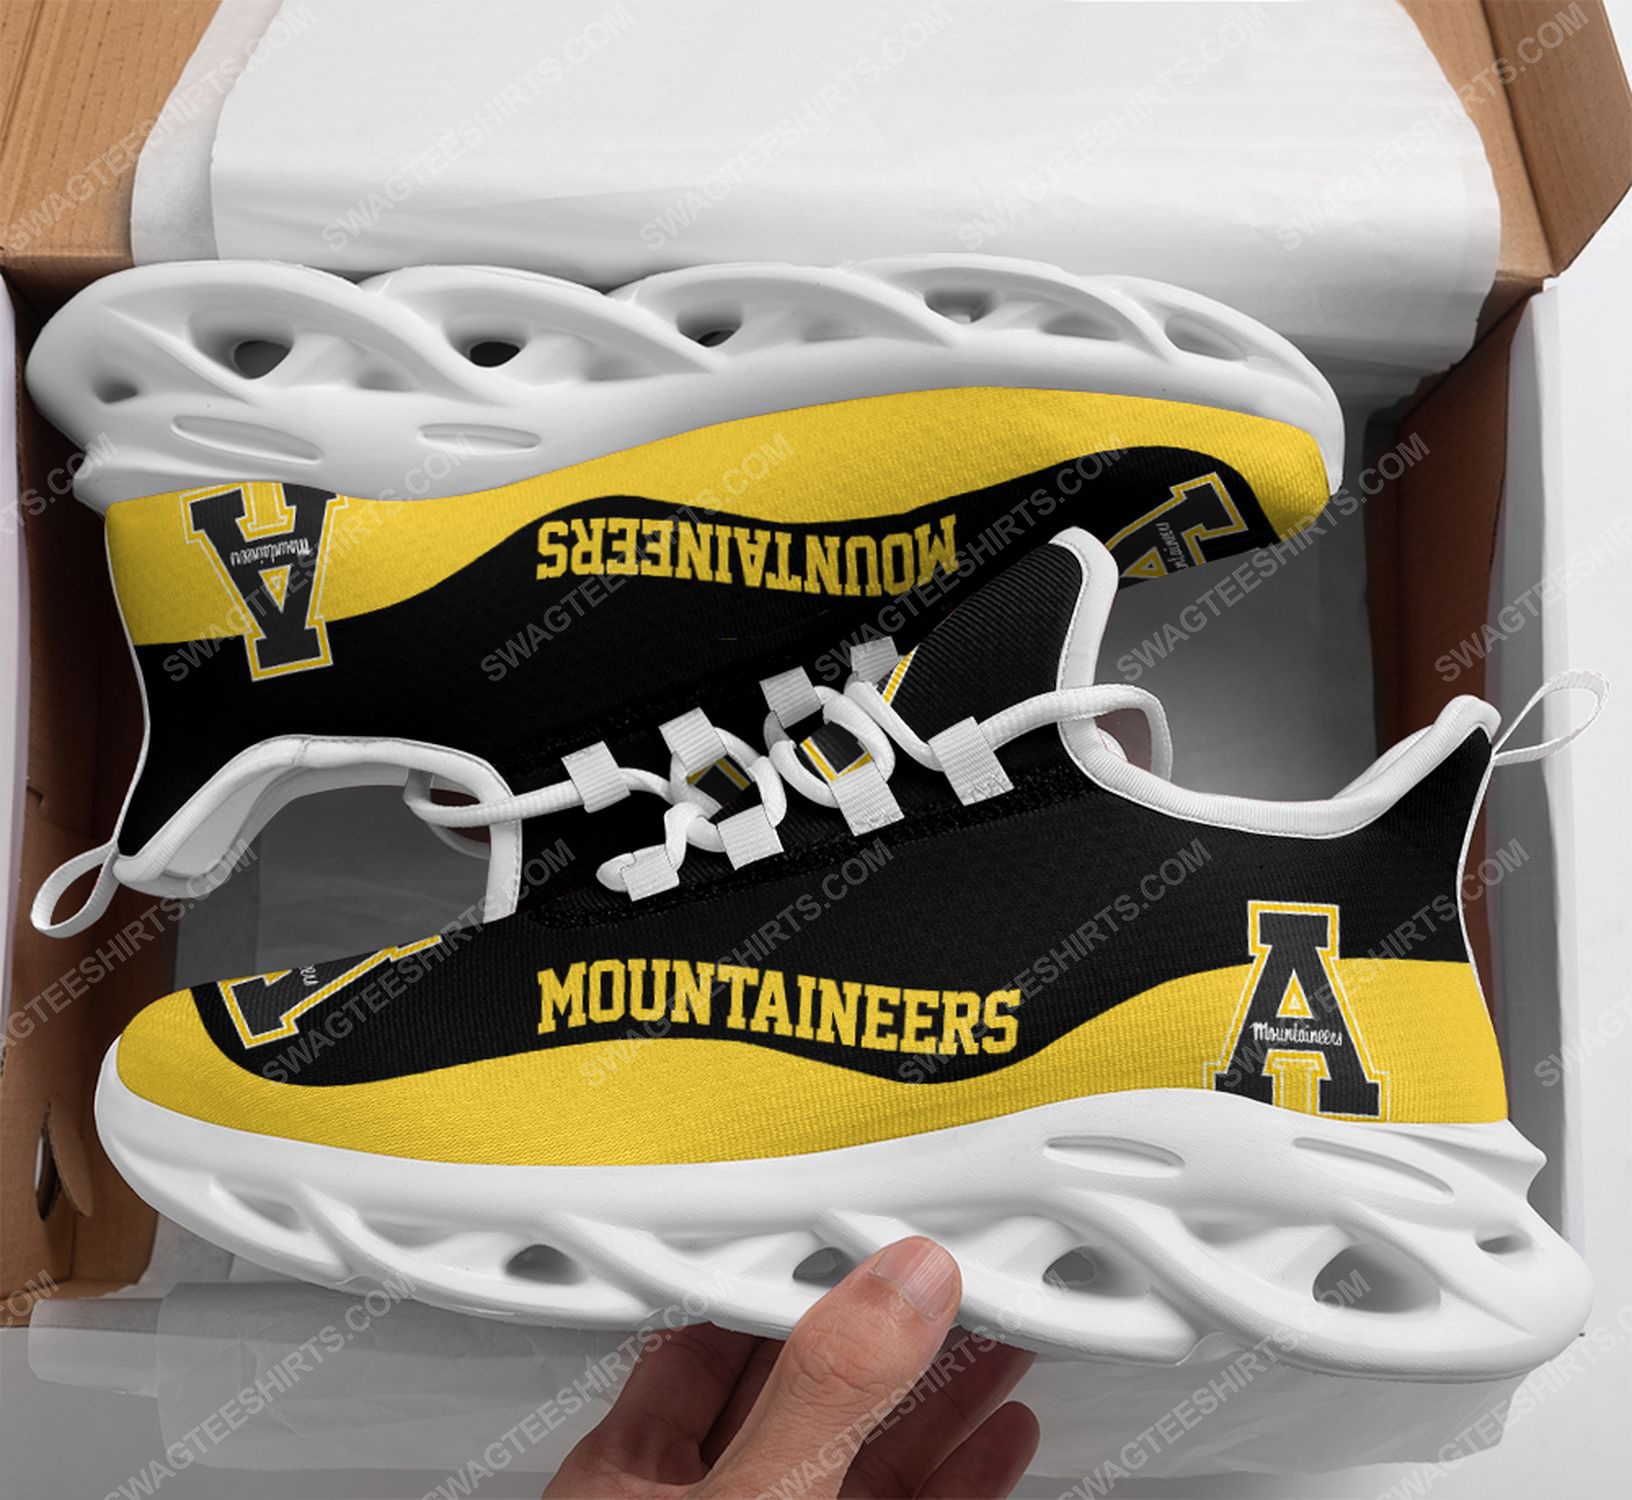 The appalachian state mountaineers football team max soul shoes 1